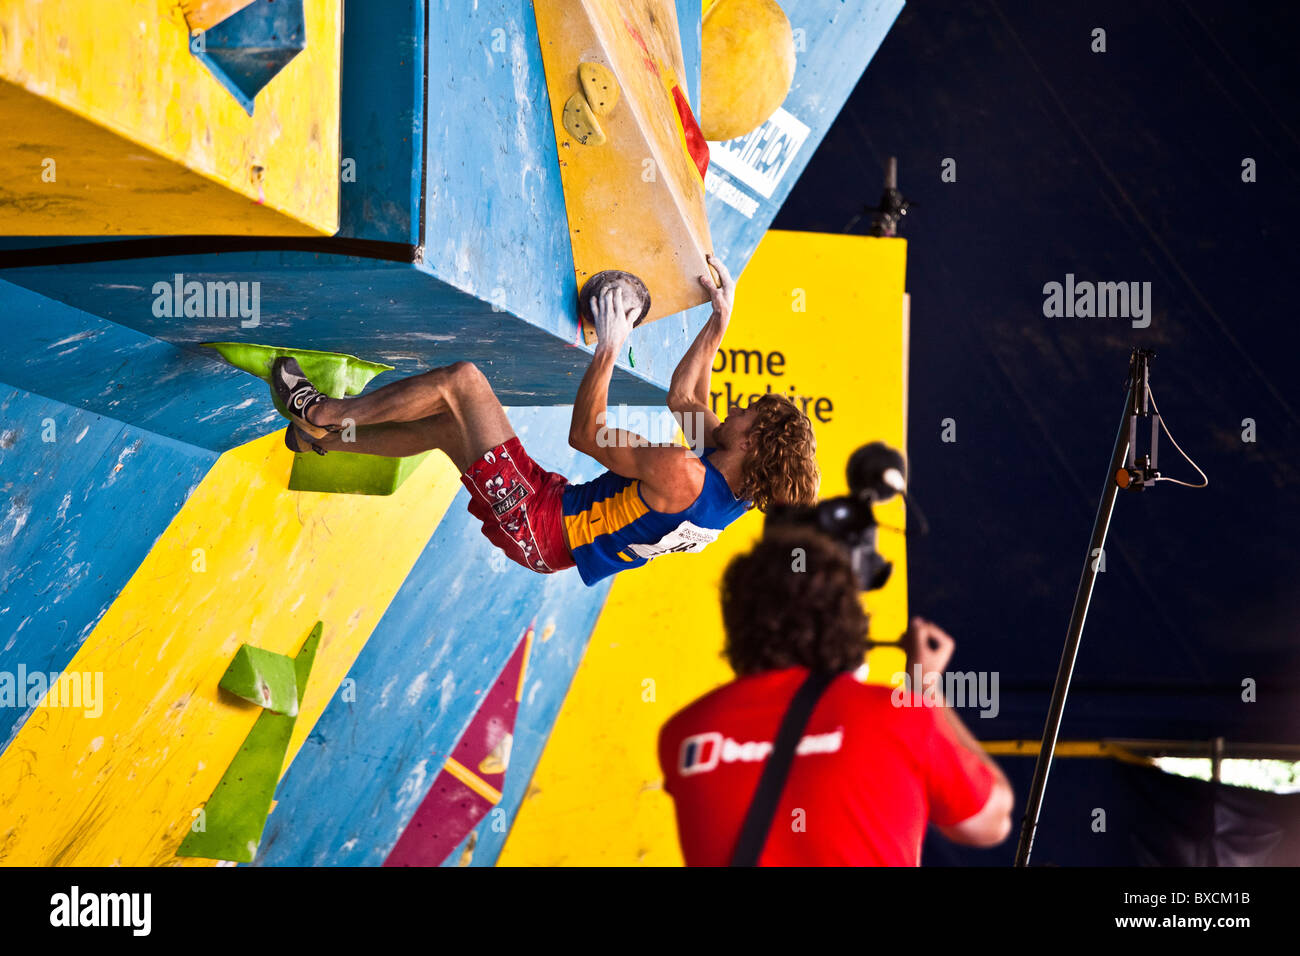 Mykhaylo Shalagin, the Ukranian sport climber, competes at the 2010 IFSC Bouldering World Cup in Sheffield. Stock Photo